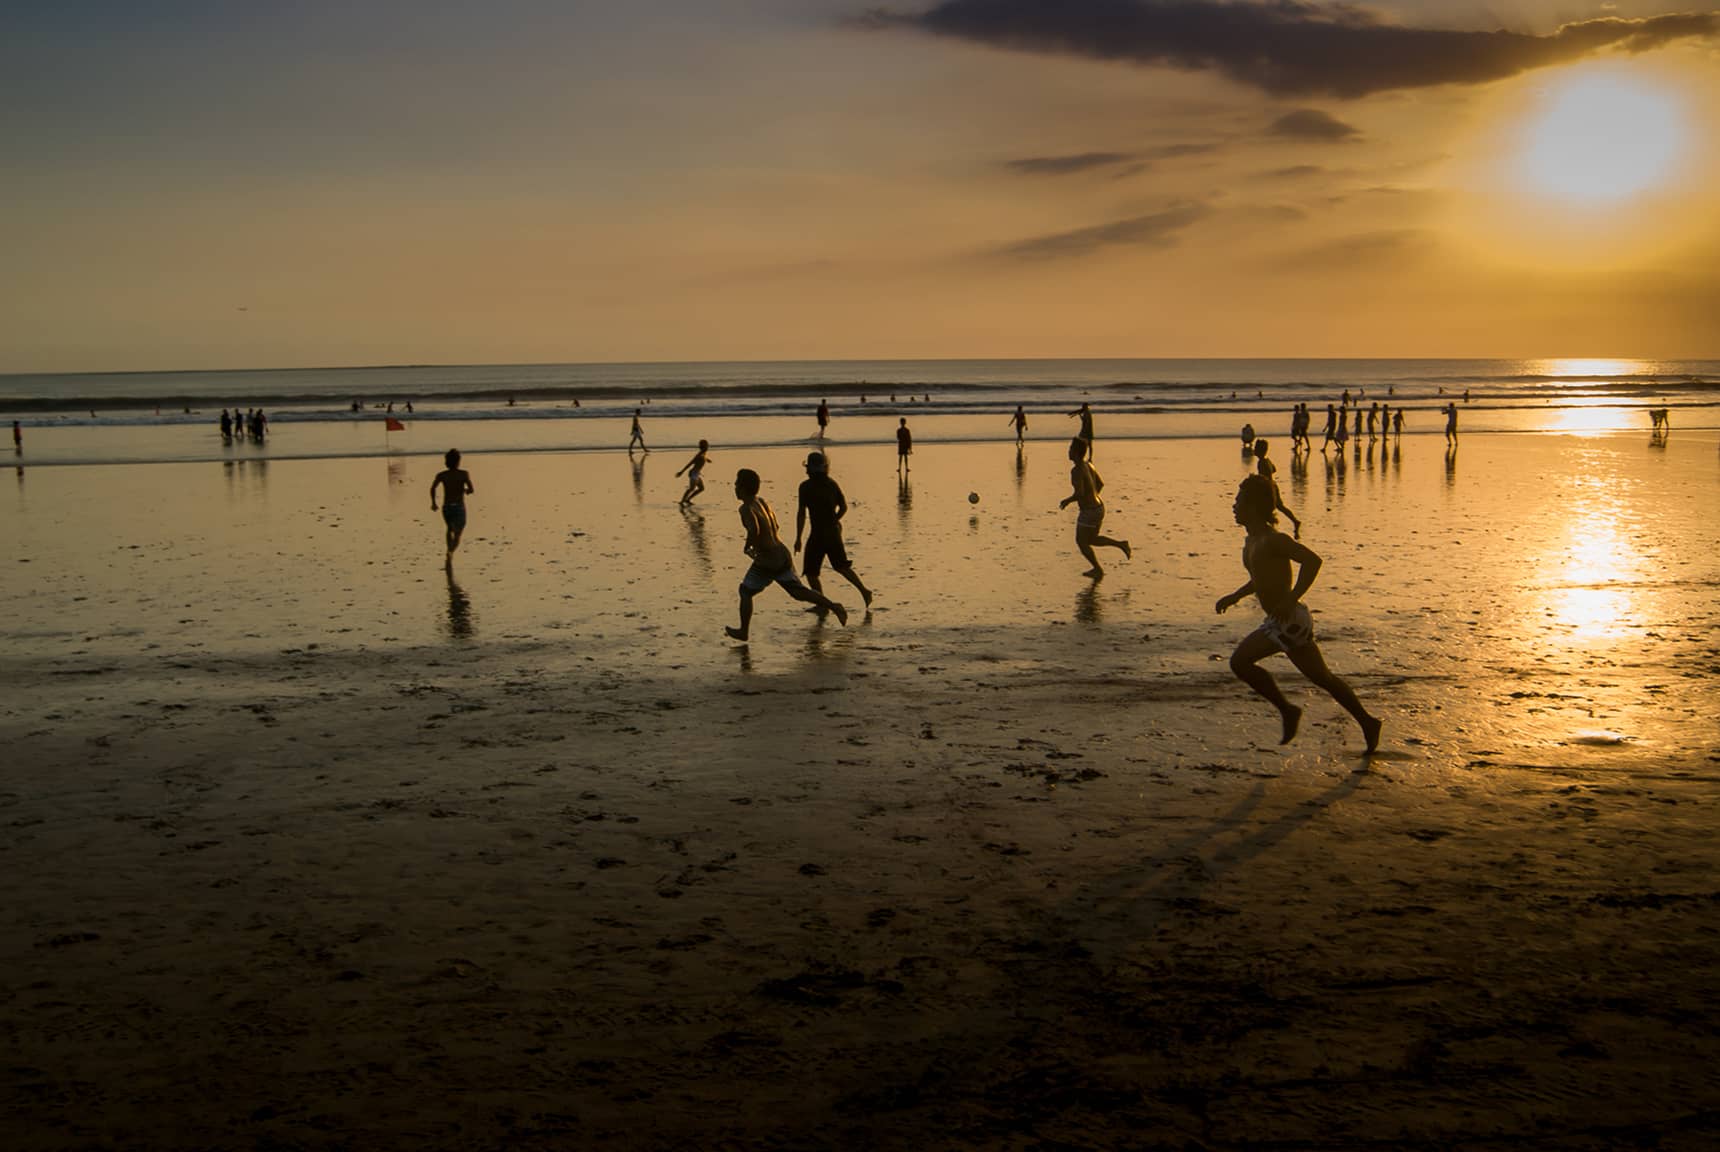 Professional photos of the beaches in Bali Indonesia